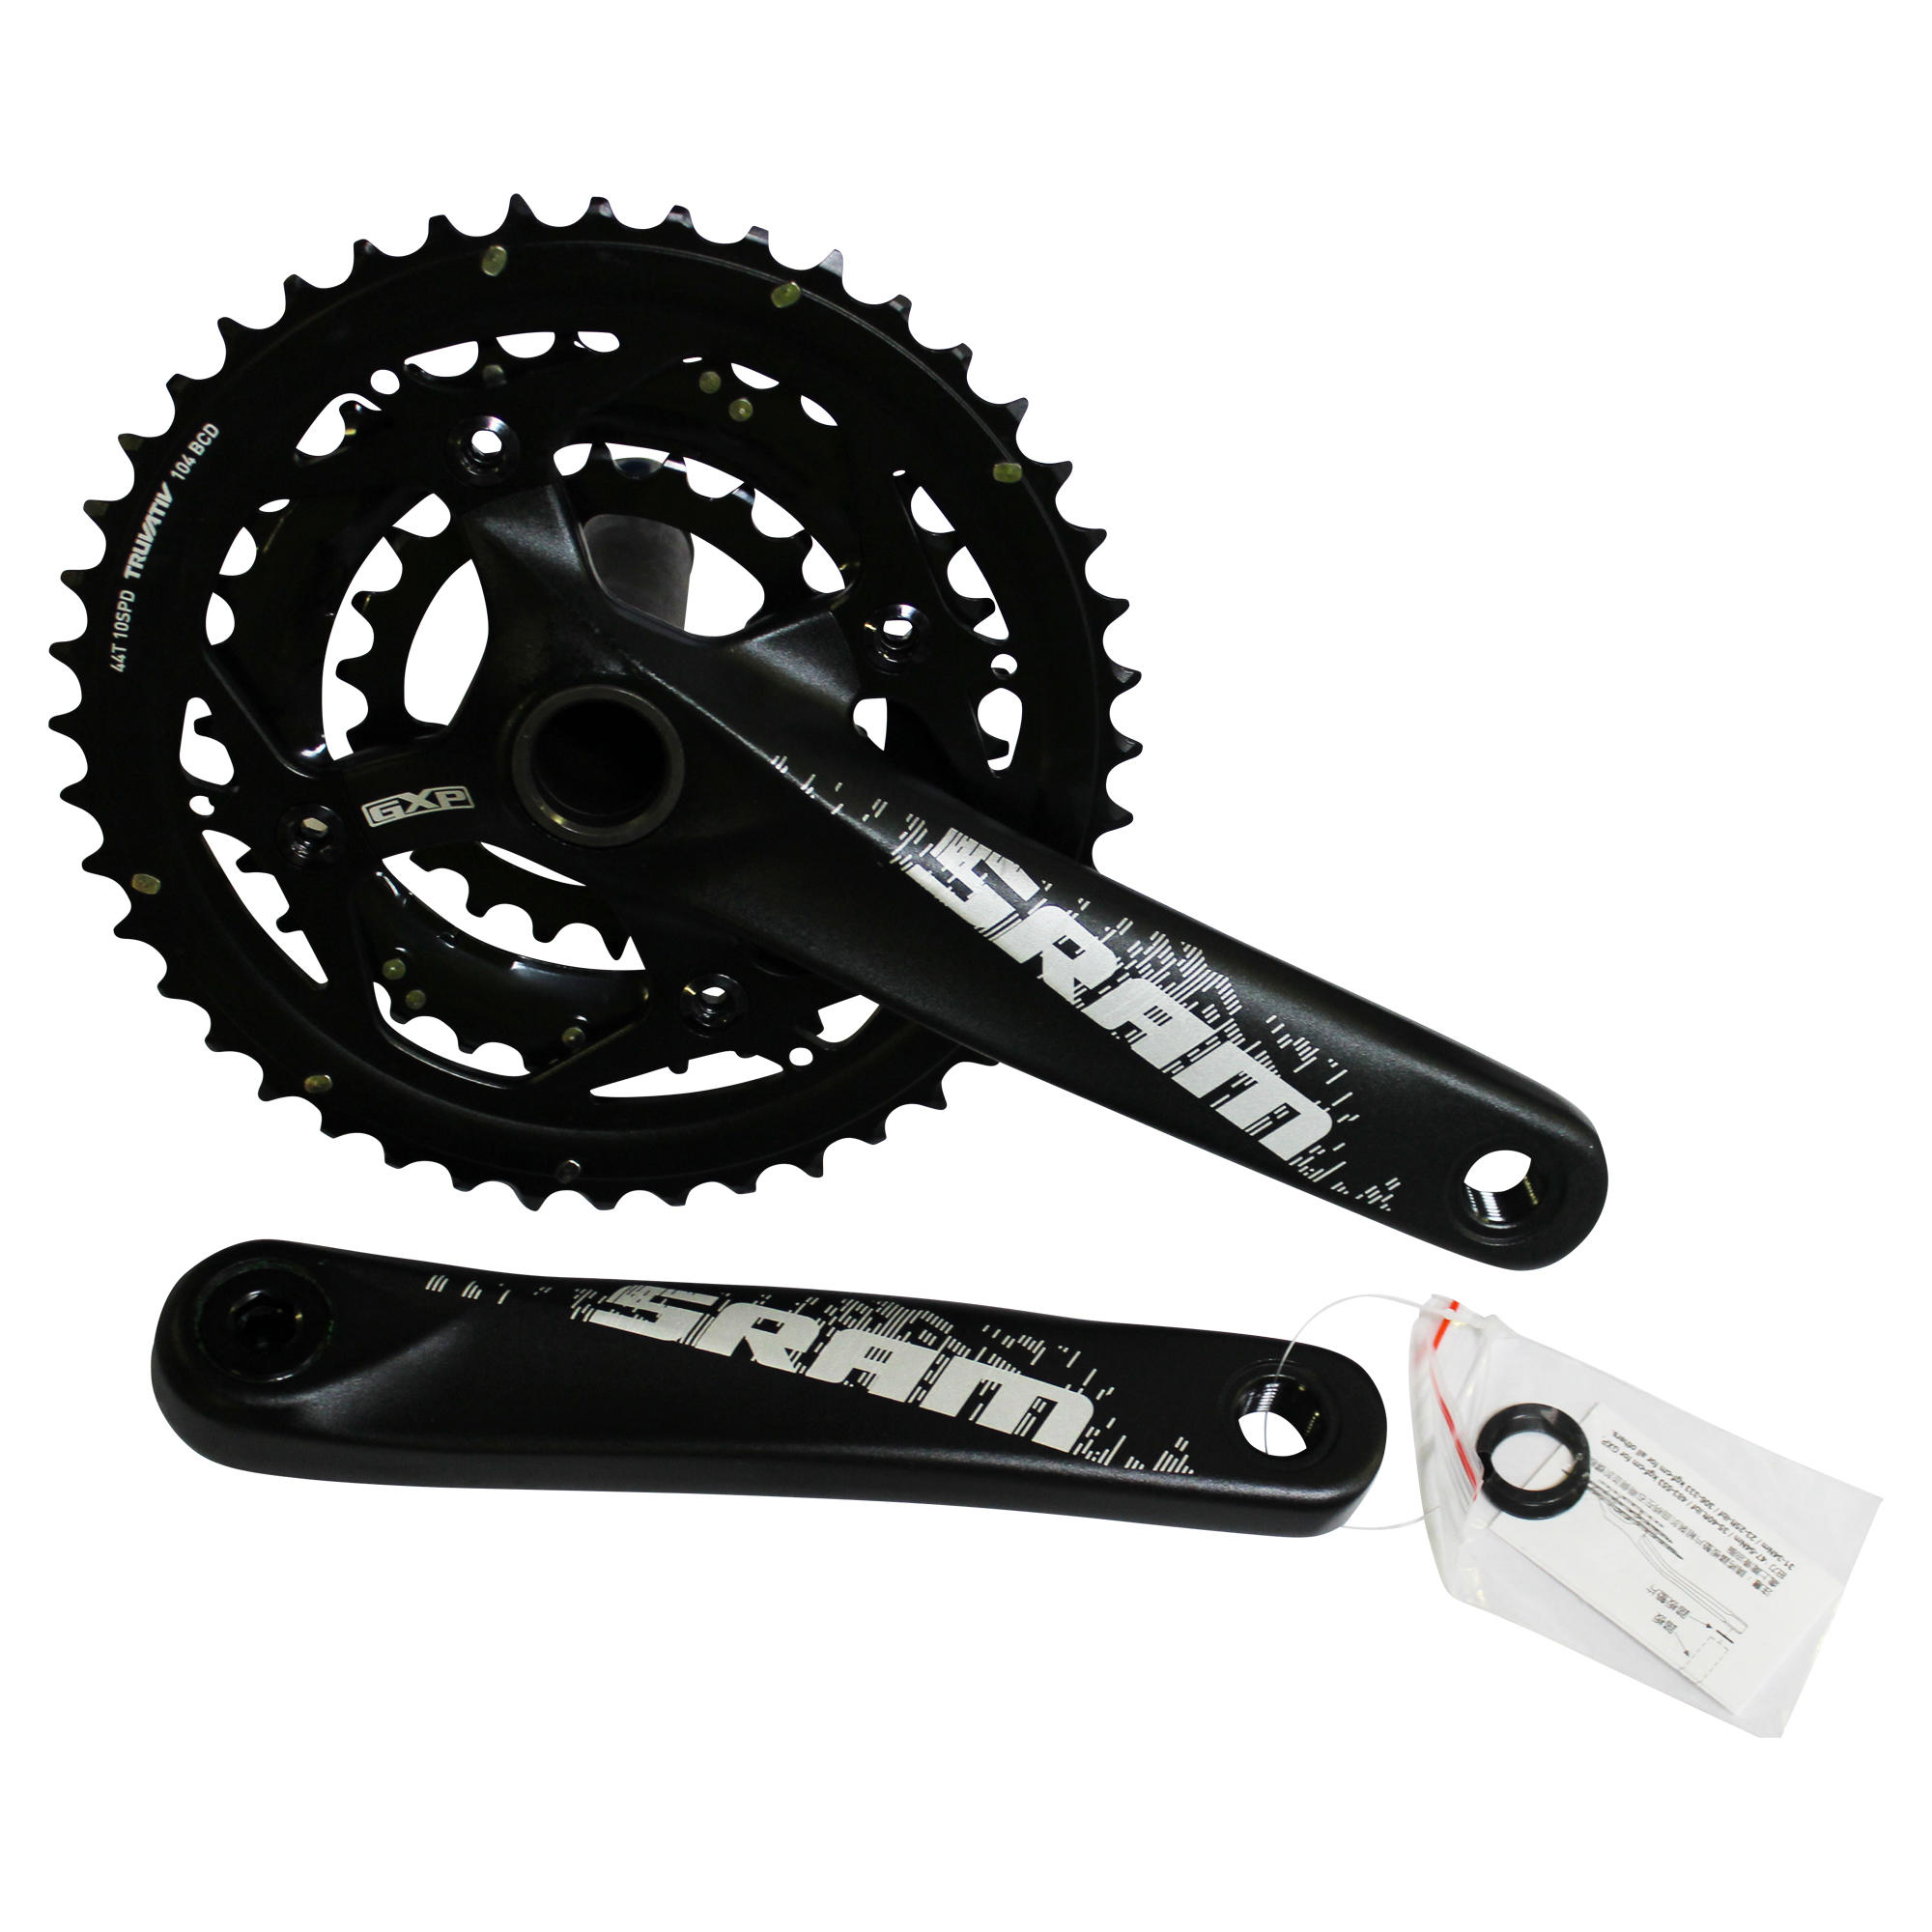 WORKSHOP S1000 44/33/22 10S 175 mm Chainset